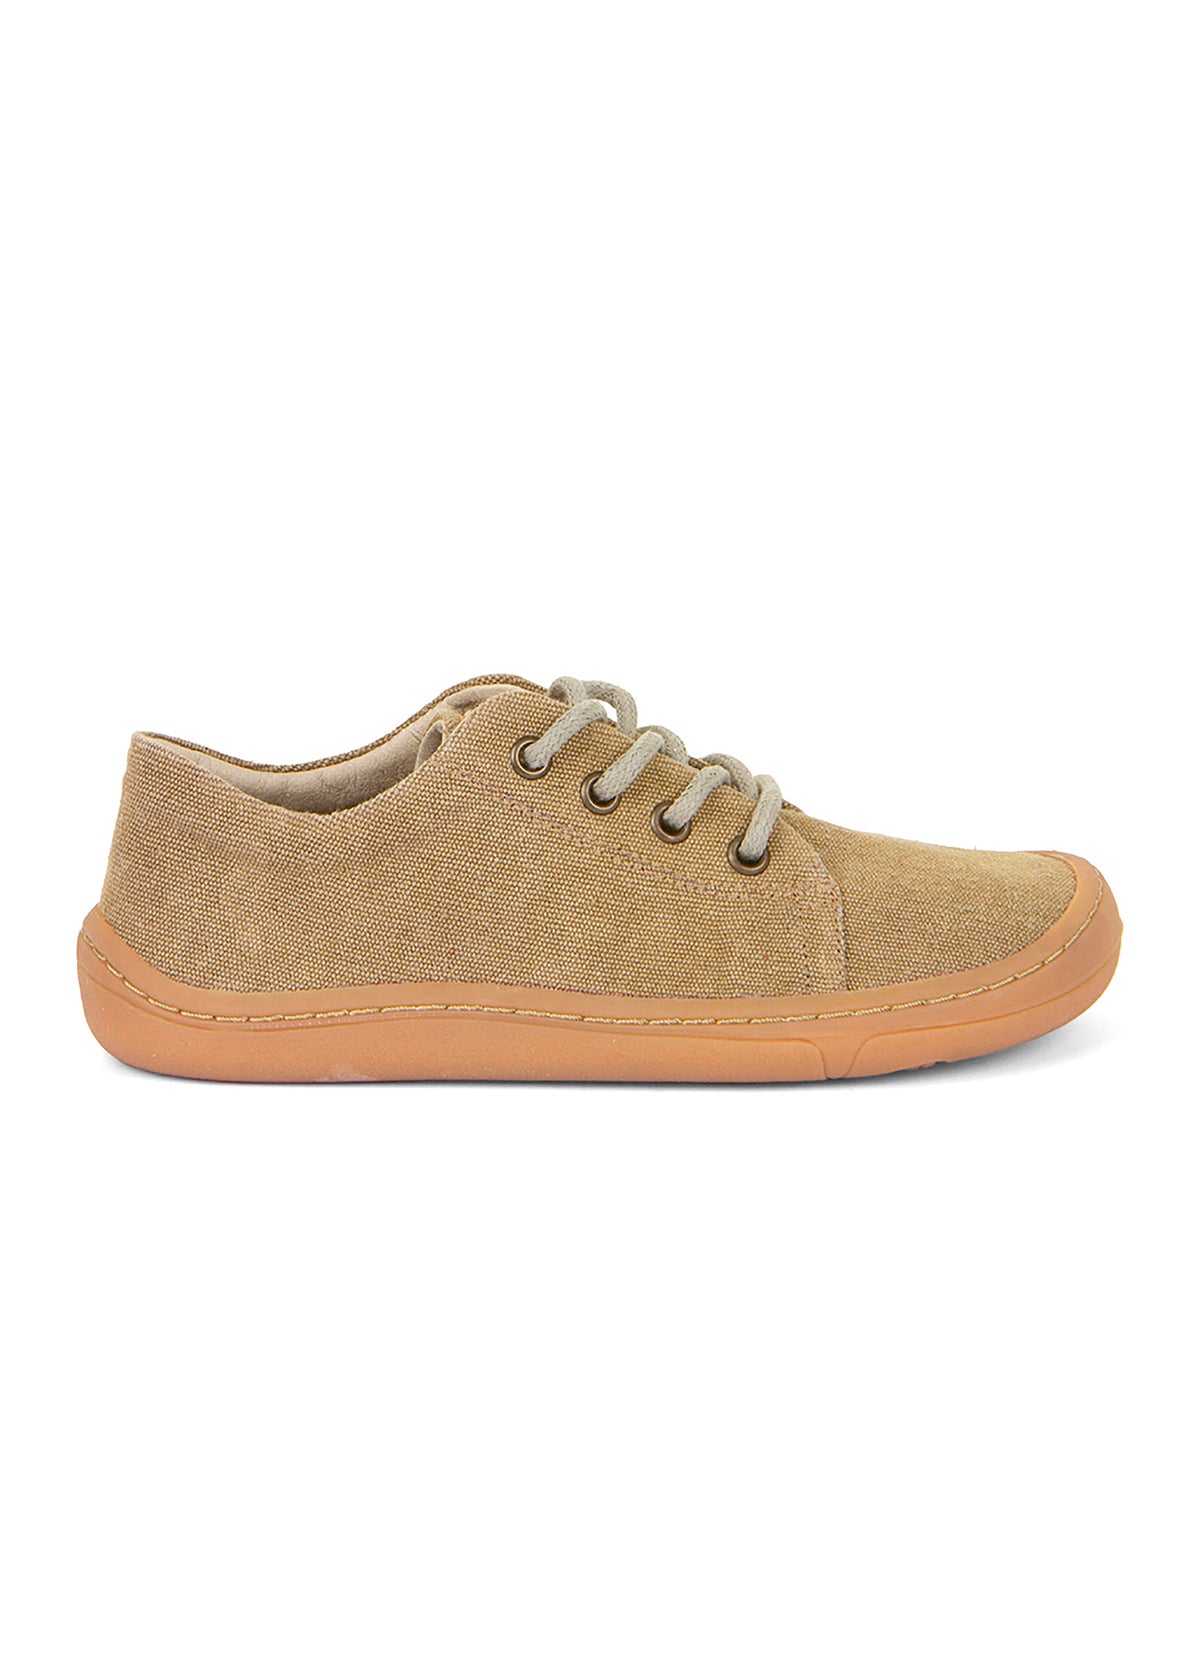 Barefoot sneakers - Vegan Laces, beige canvas fabric